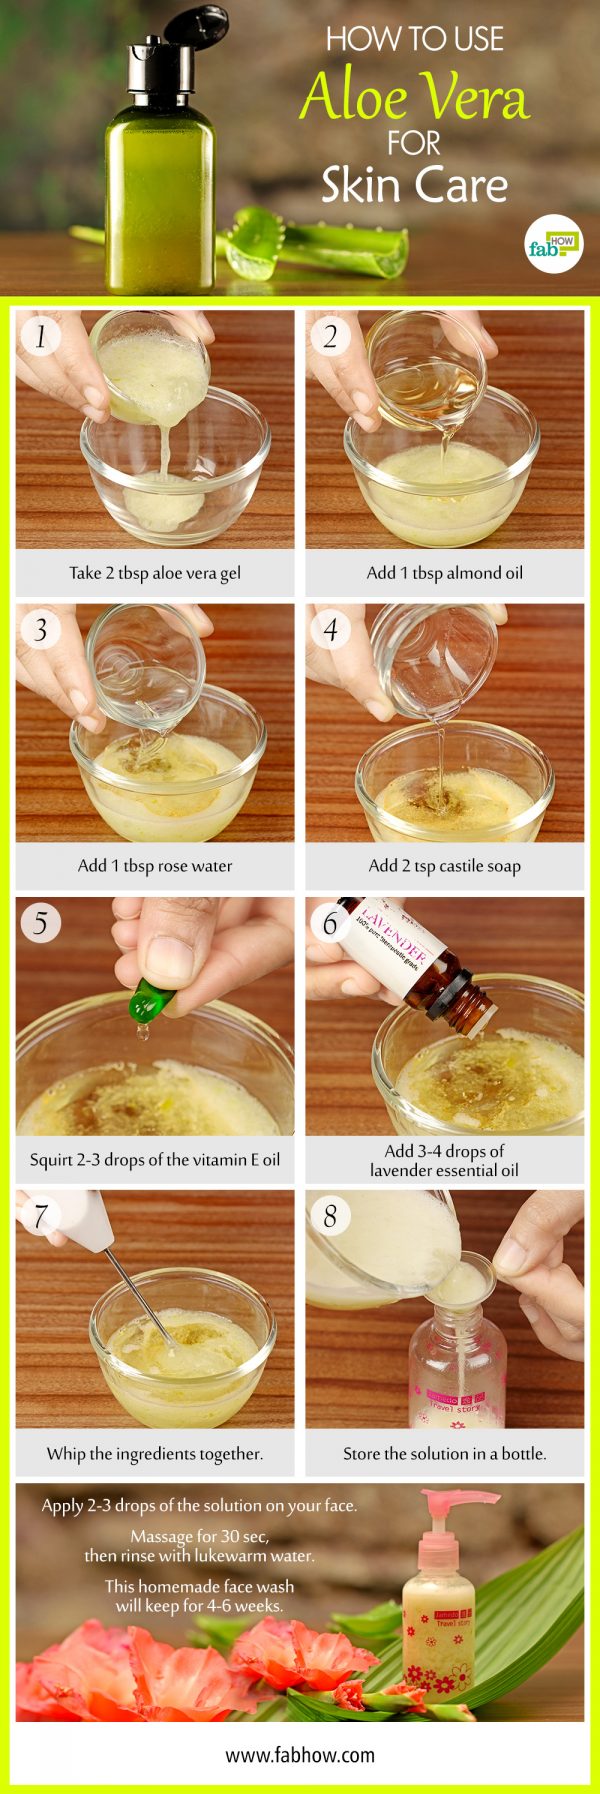 how to use aloe vera to get glowing skin